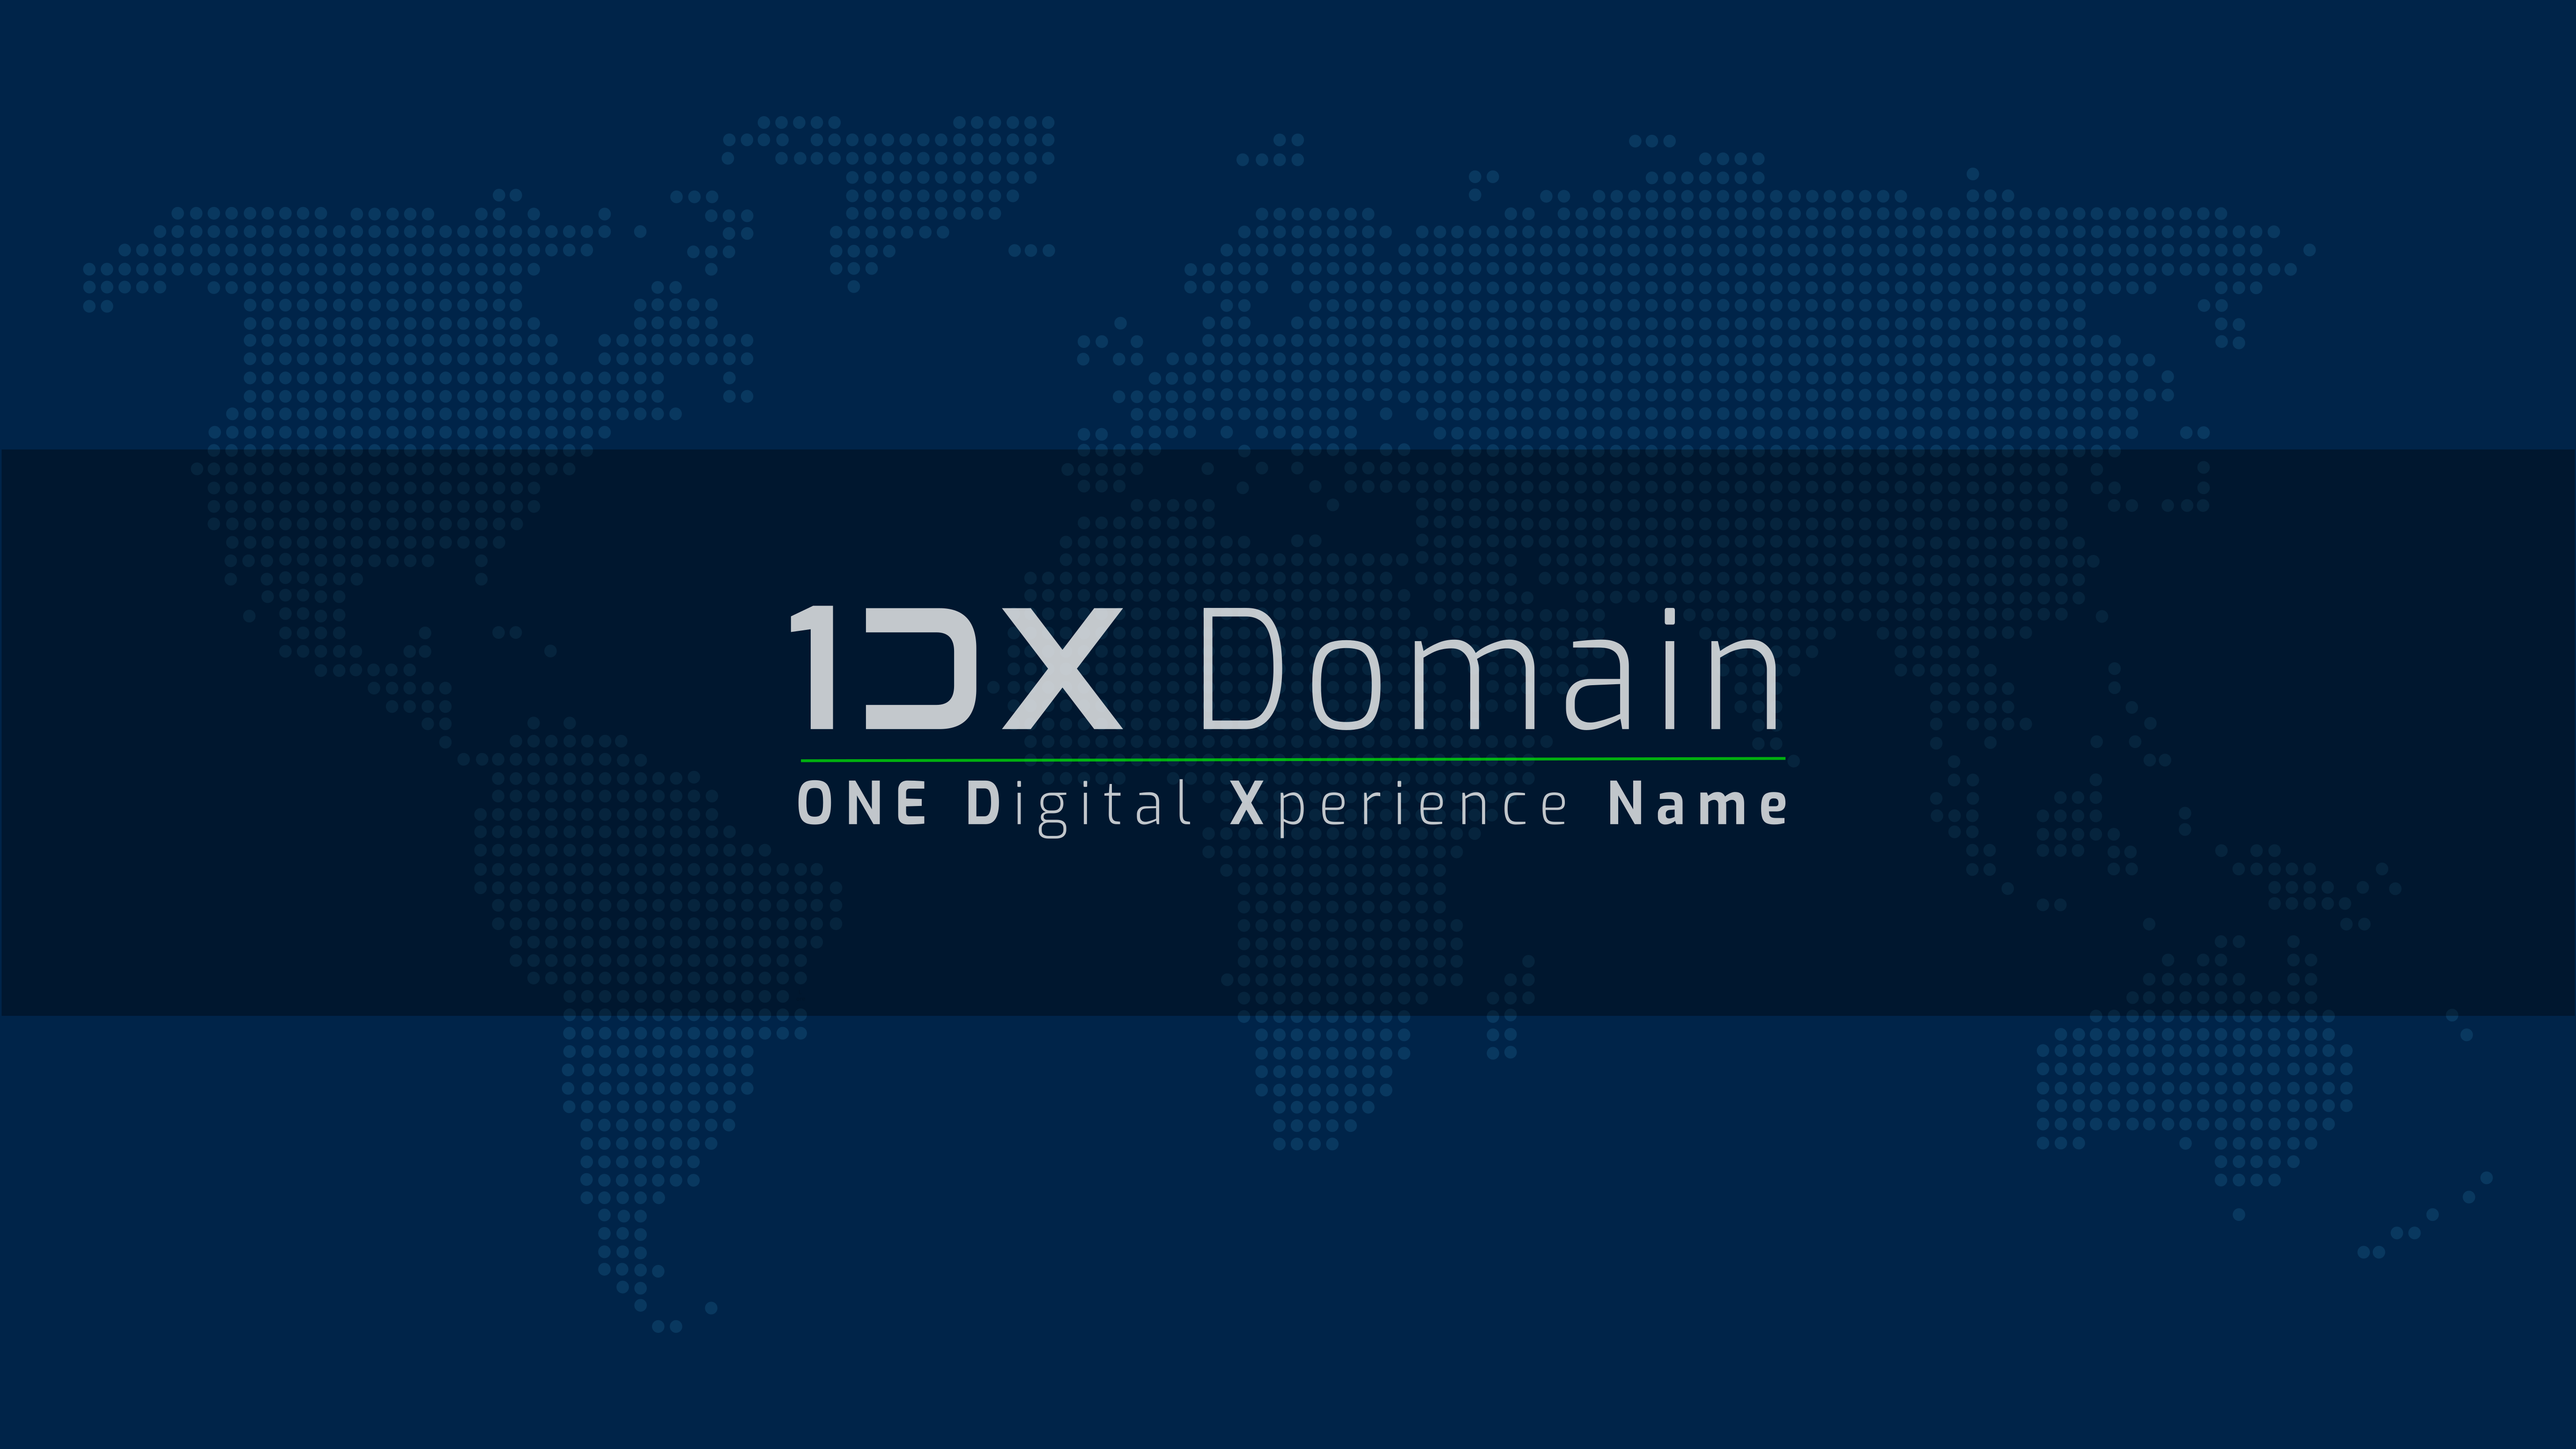 LoneSync Domain - Your DX(Digital Xperience)